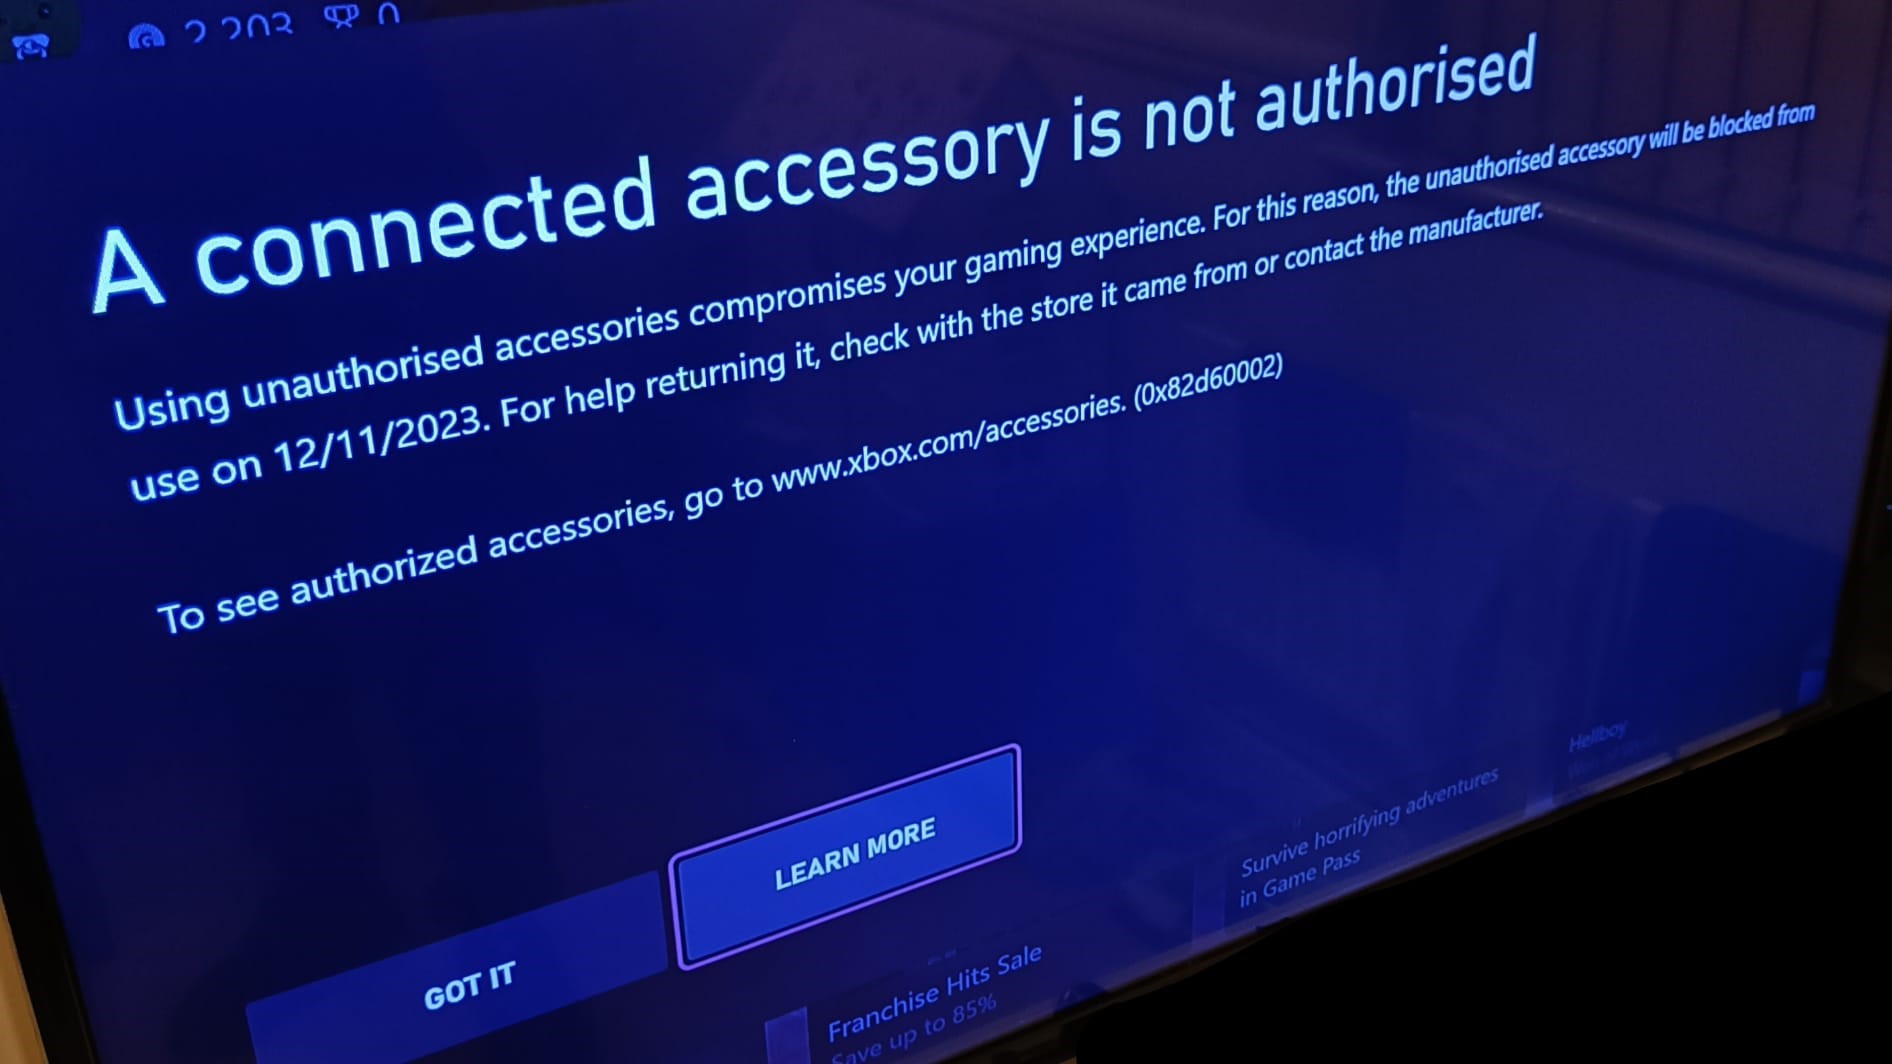 Error message on Xbox when attempting use of an unauthorized accessory reads 